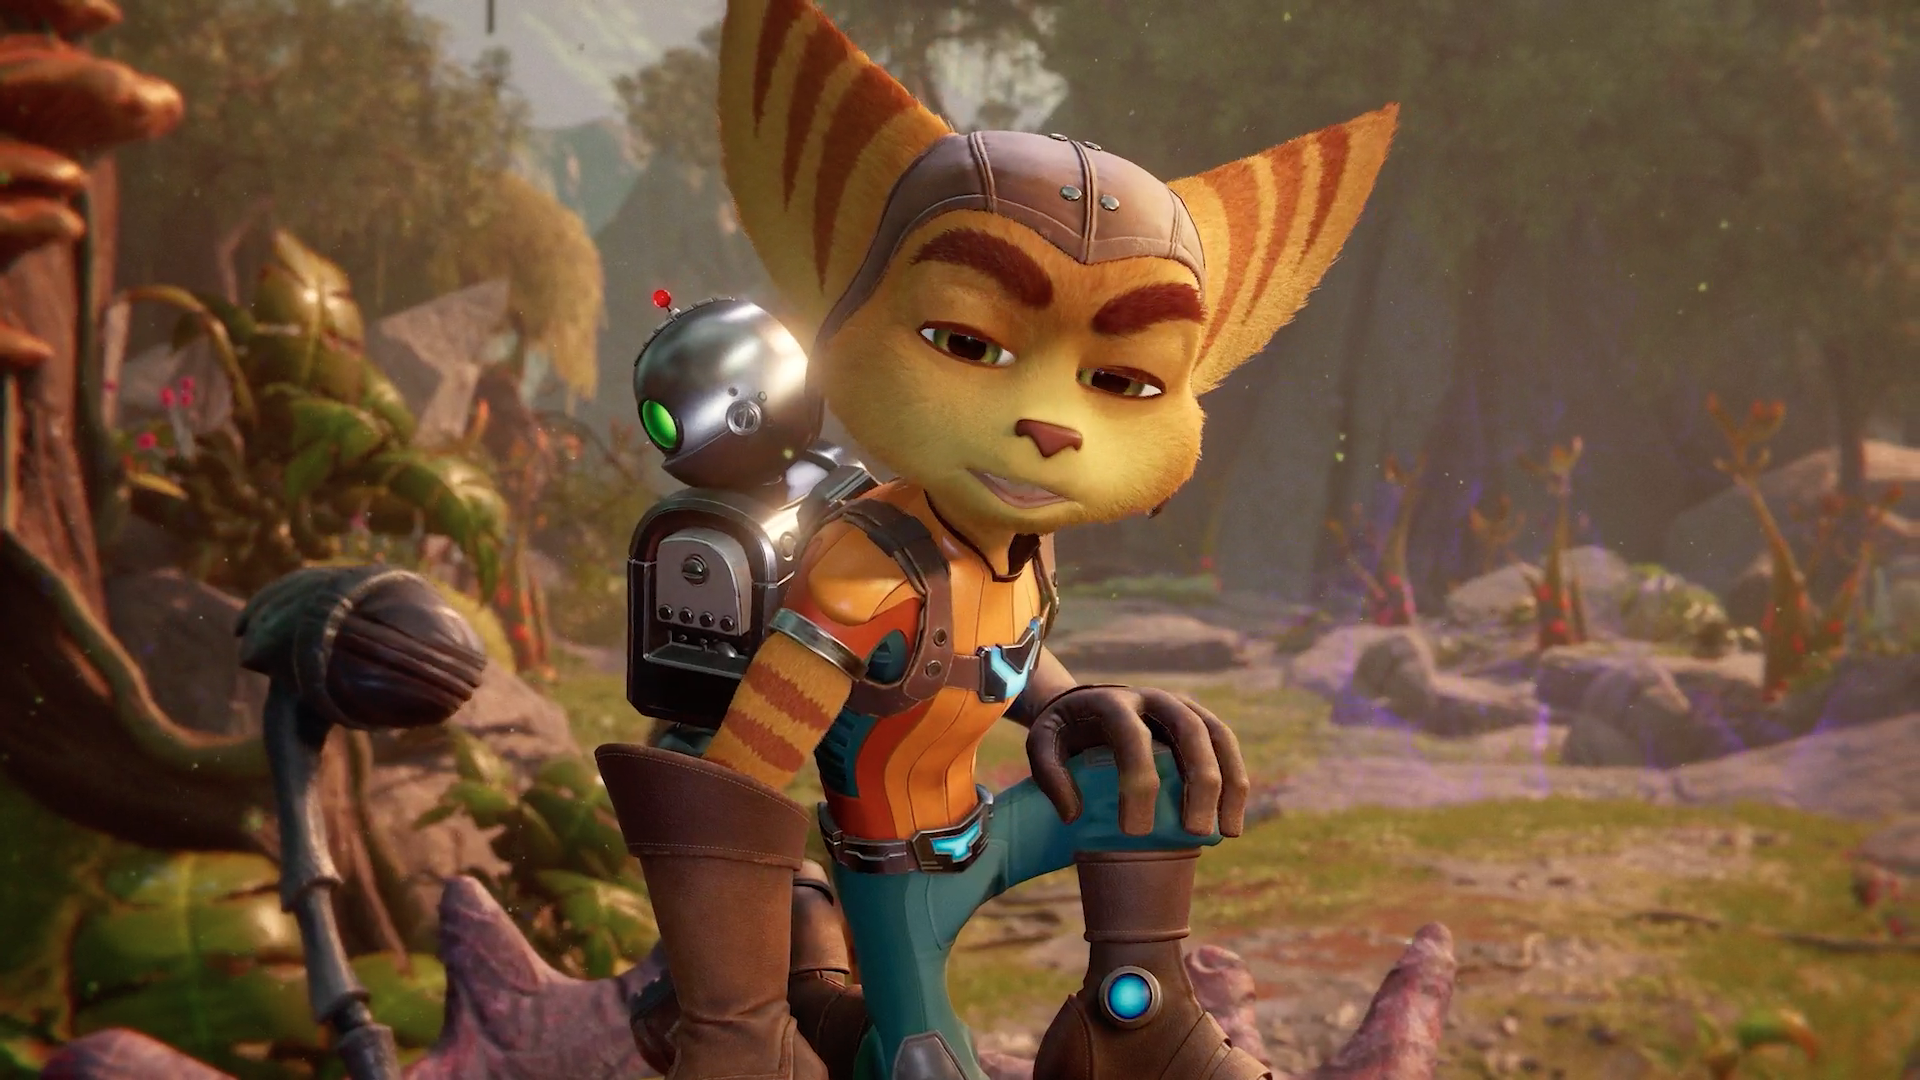 Ratchet & Clank: Rift Apart Announced for PlayStation 5 Escape: Gaming News, Reviews, Wikis, and Podcasts